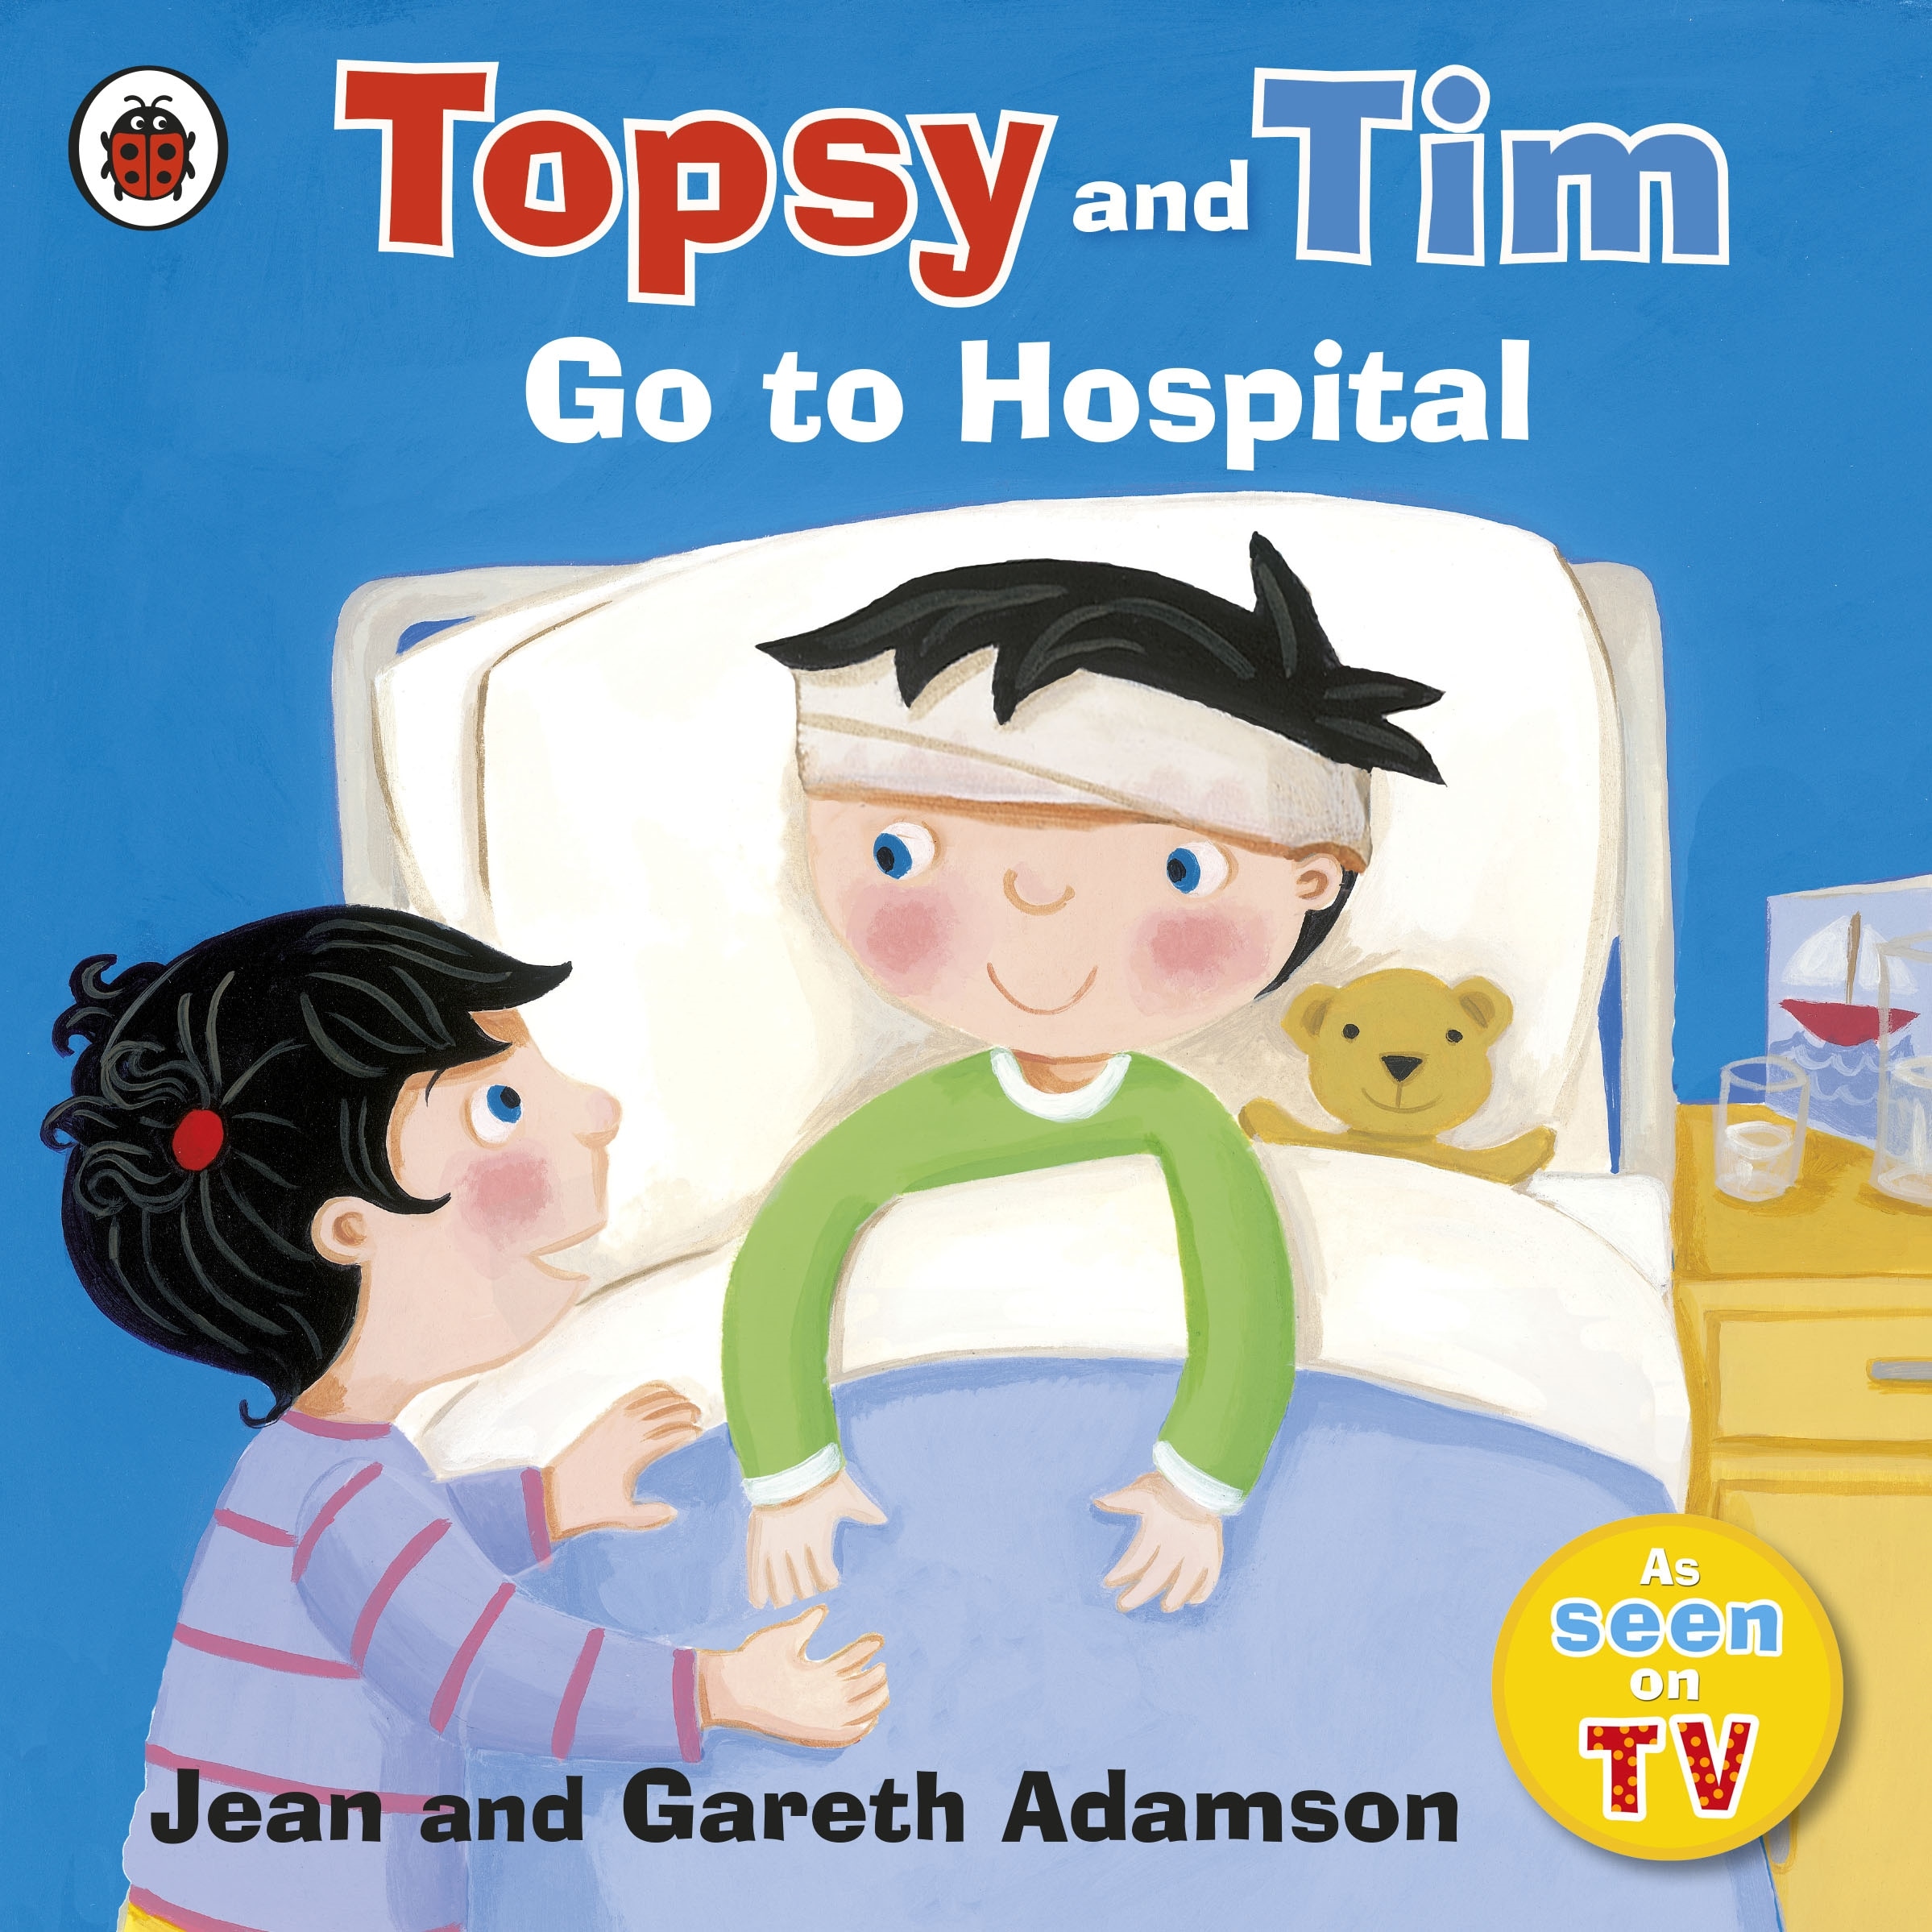 Book “Topsy and Tim: Go to Hospital” by Jean Adamson — August 5, 2010